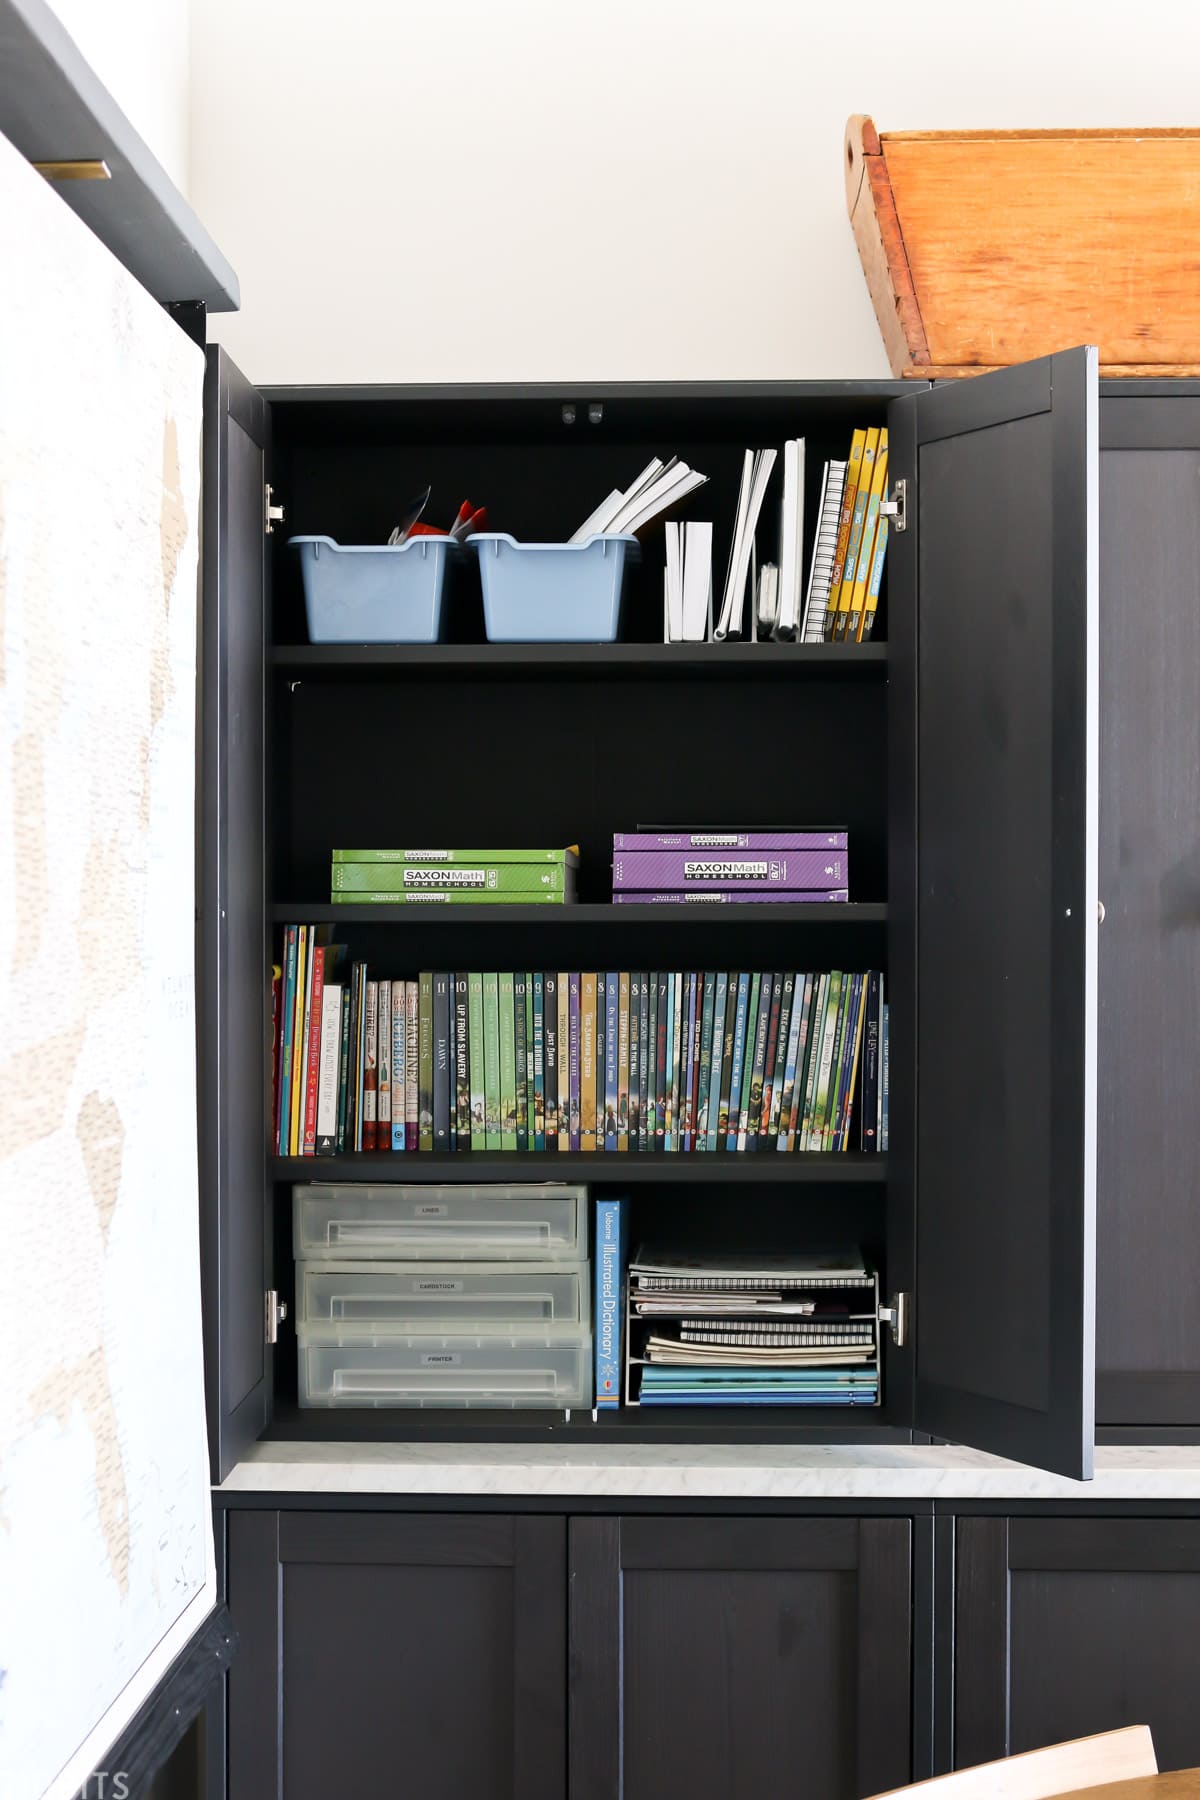 storage IKEA cabinet is filled with school supplies